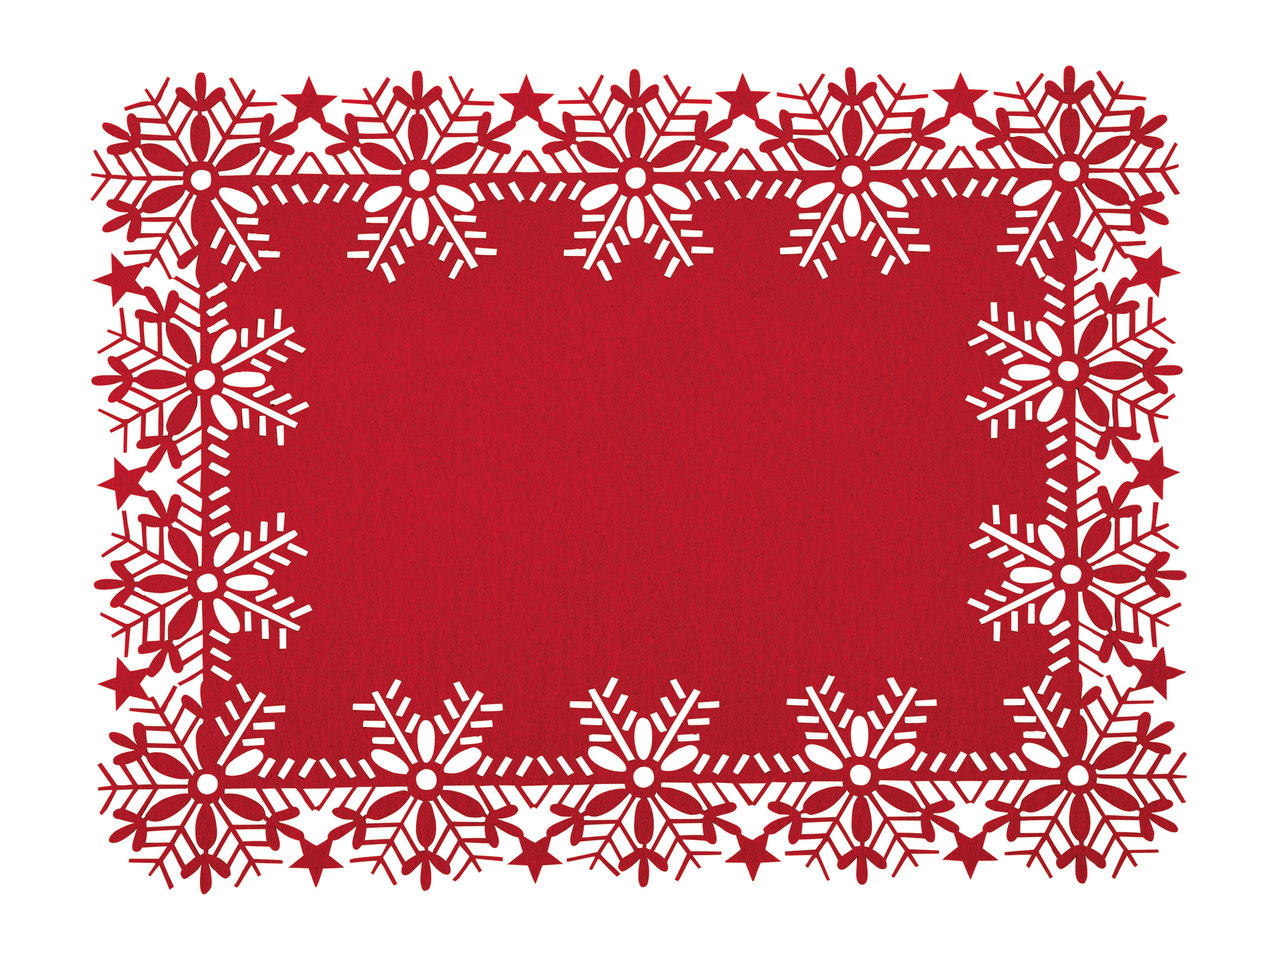 Meradiso Christmas Table Runner or Placemats1